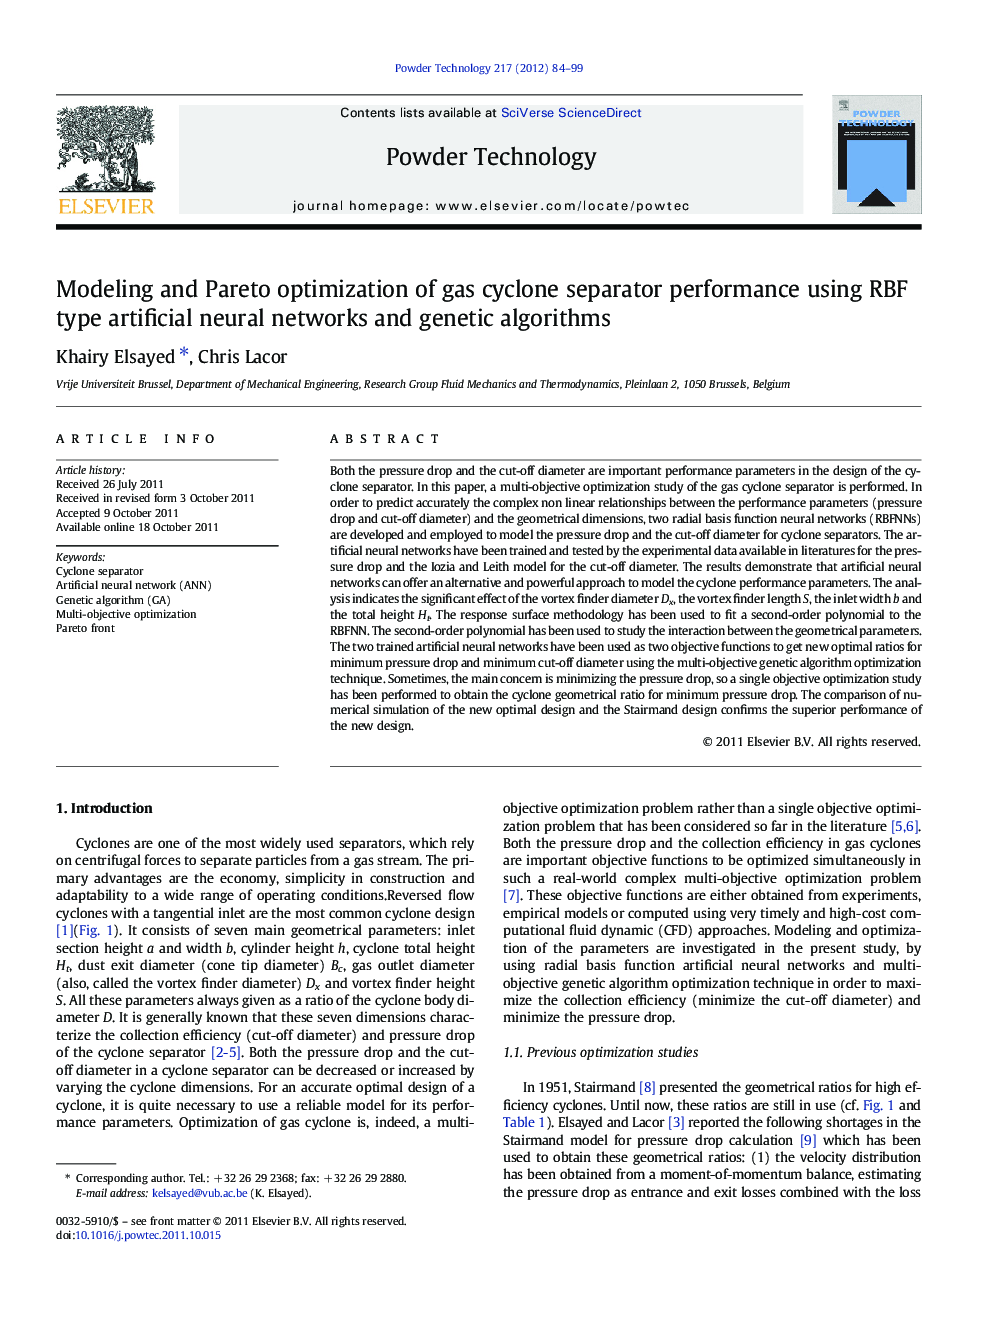 Modeling and Pareto optimization of gas cyclone separator performance using RBF type artificial neural networks and genetic algorithms